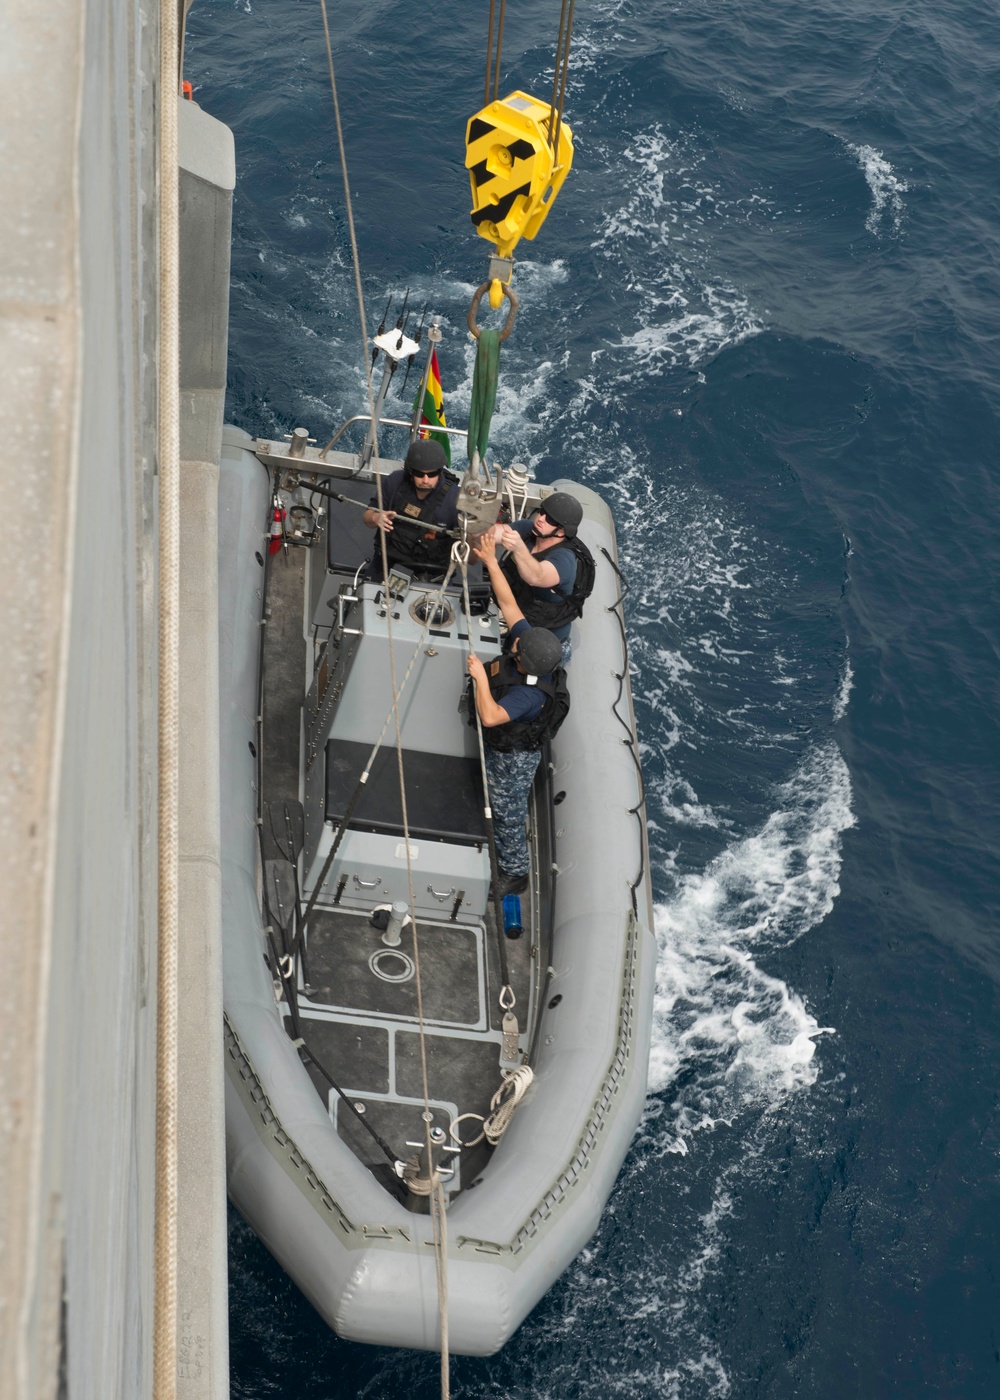 USNS Spearhead combined joint boarding operations